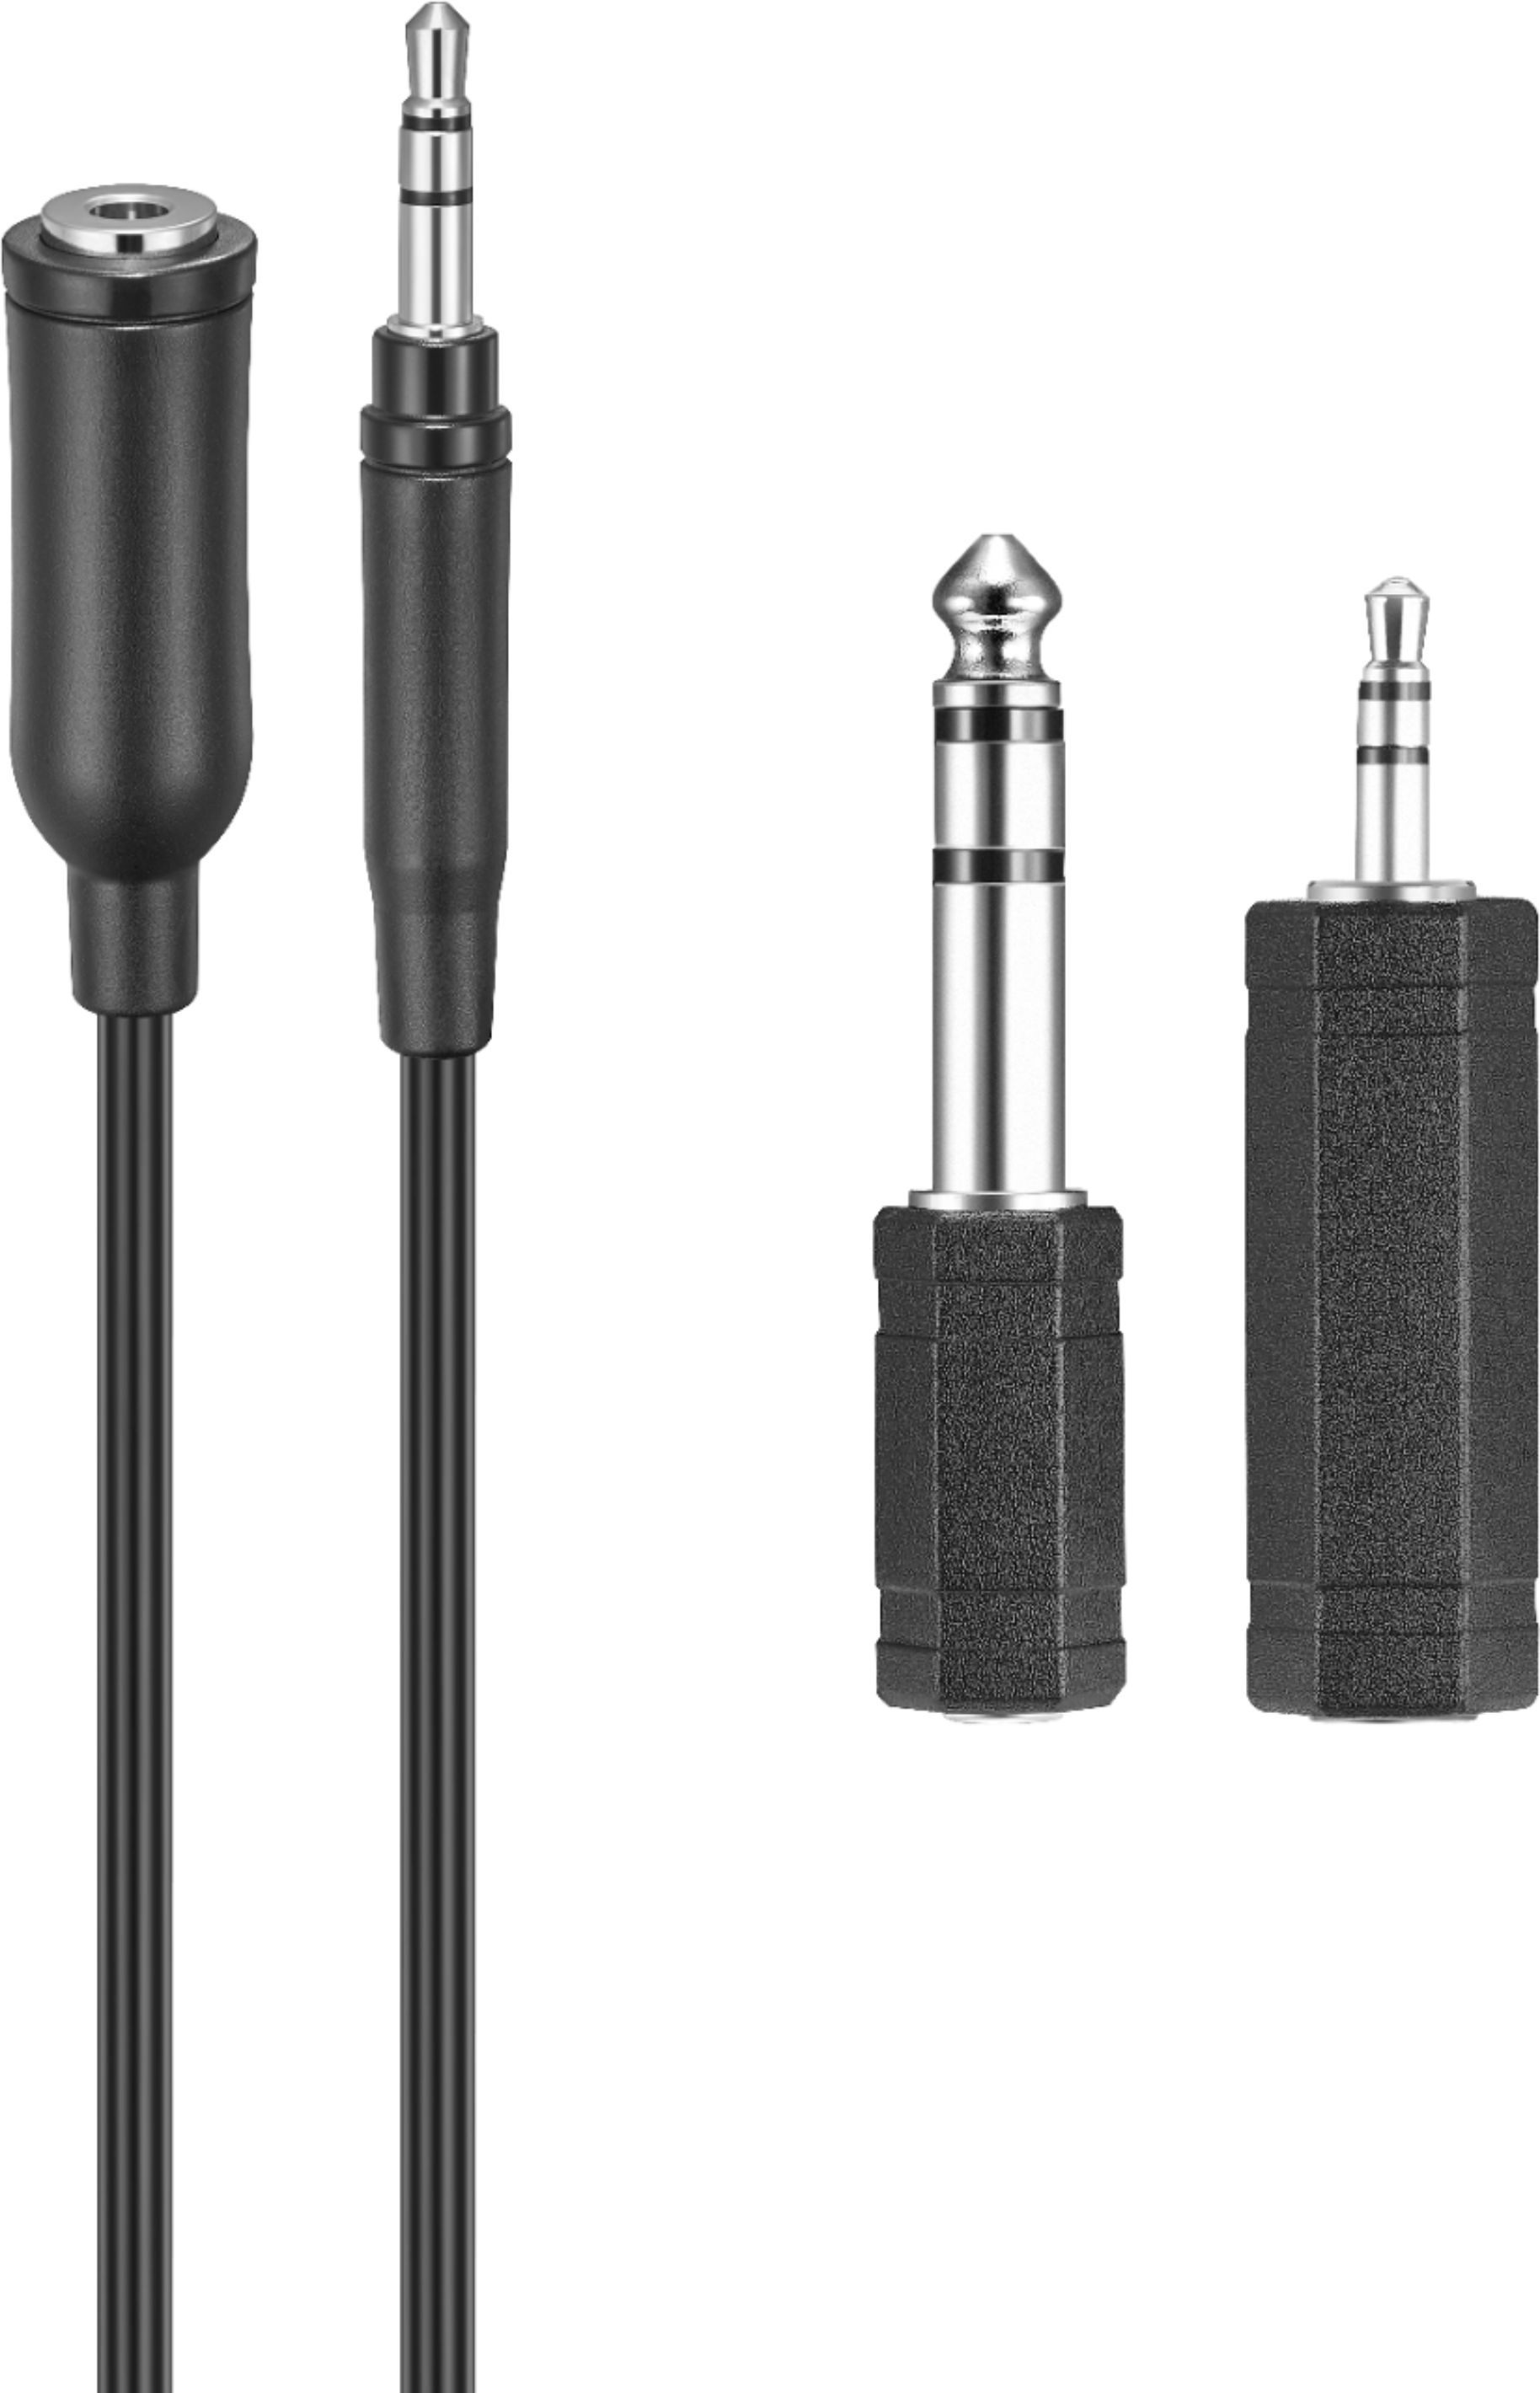 3.5 mm female to 2.5 mm male audio adapter (A-3.5F-2.5M)